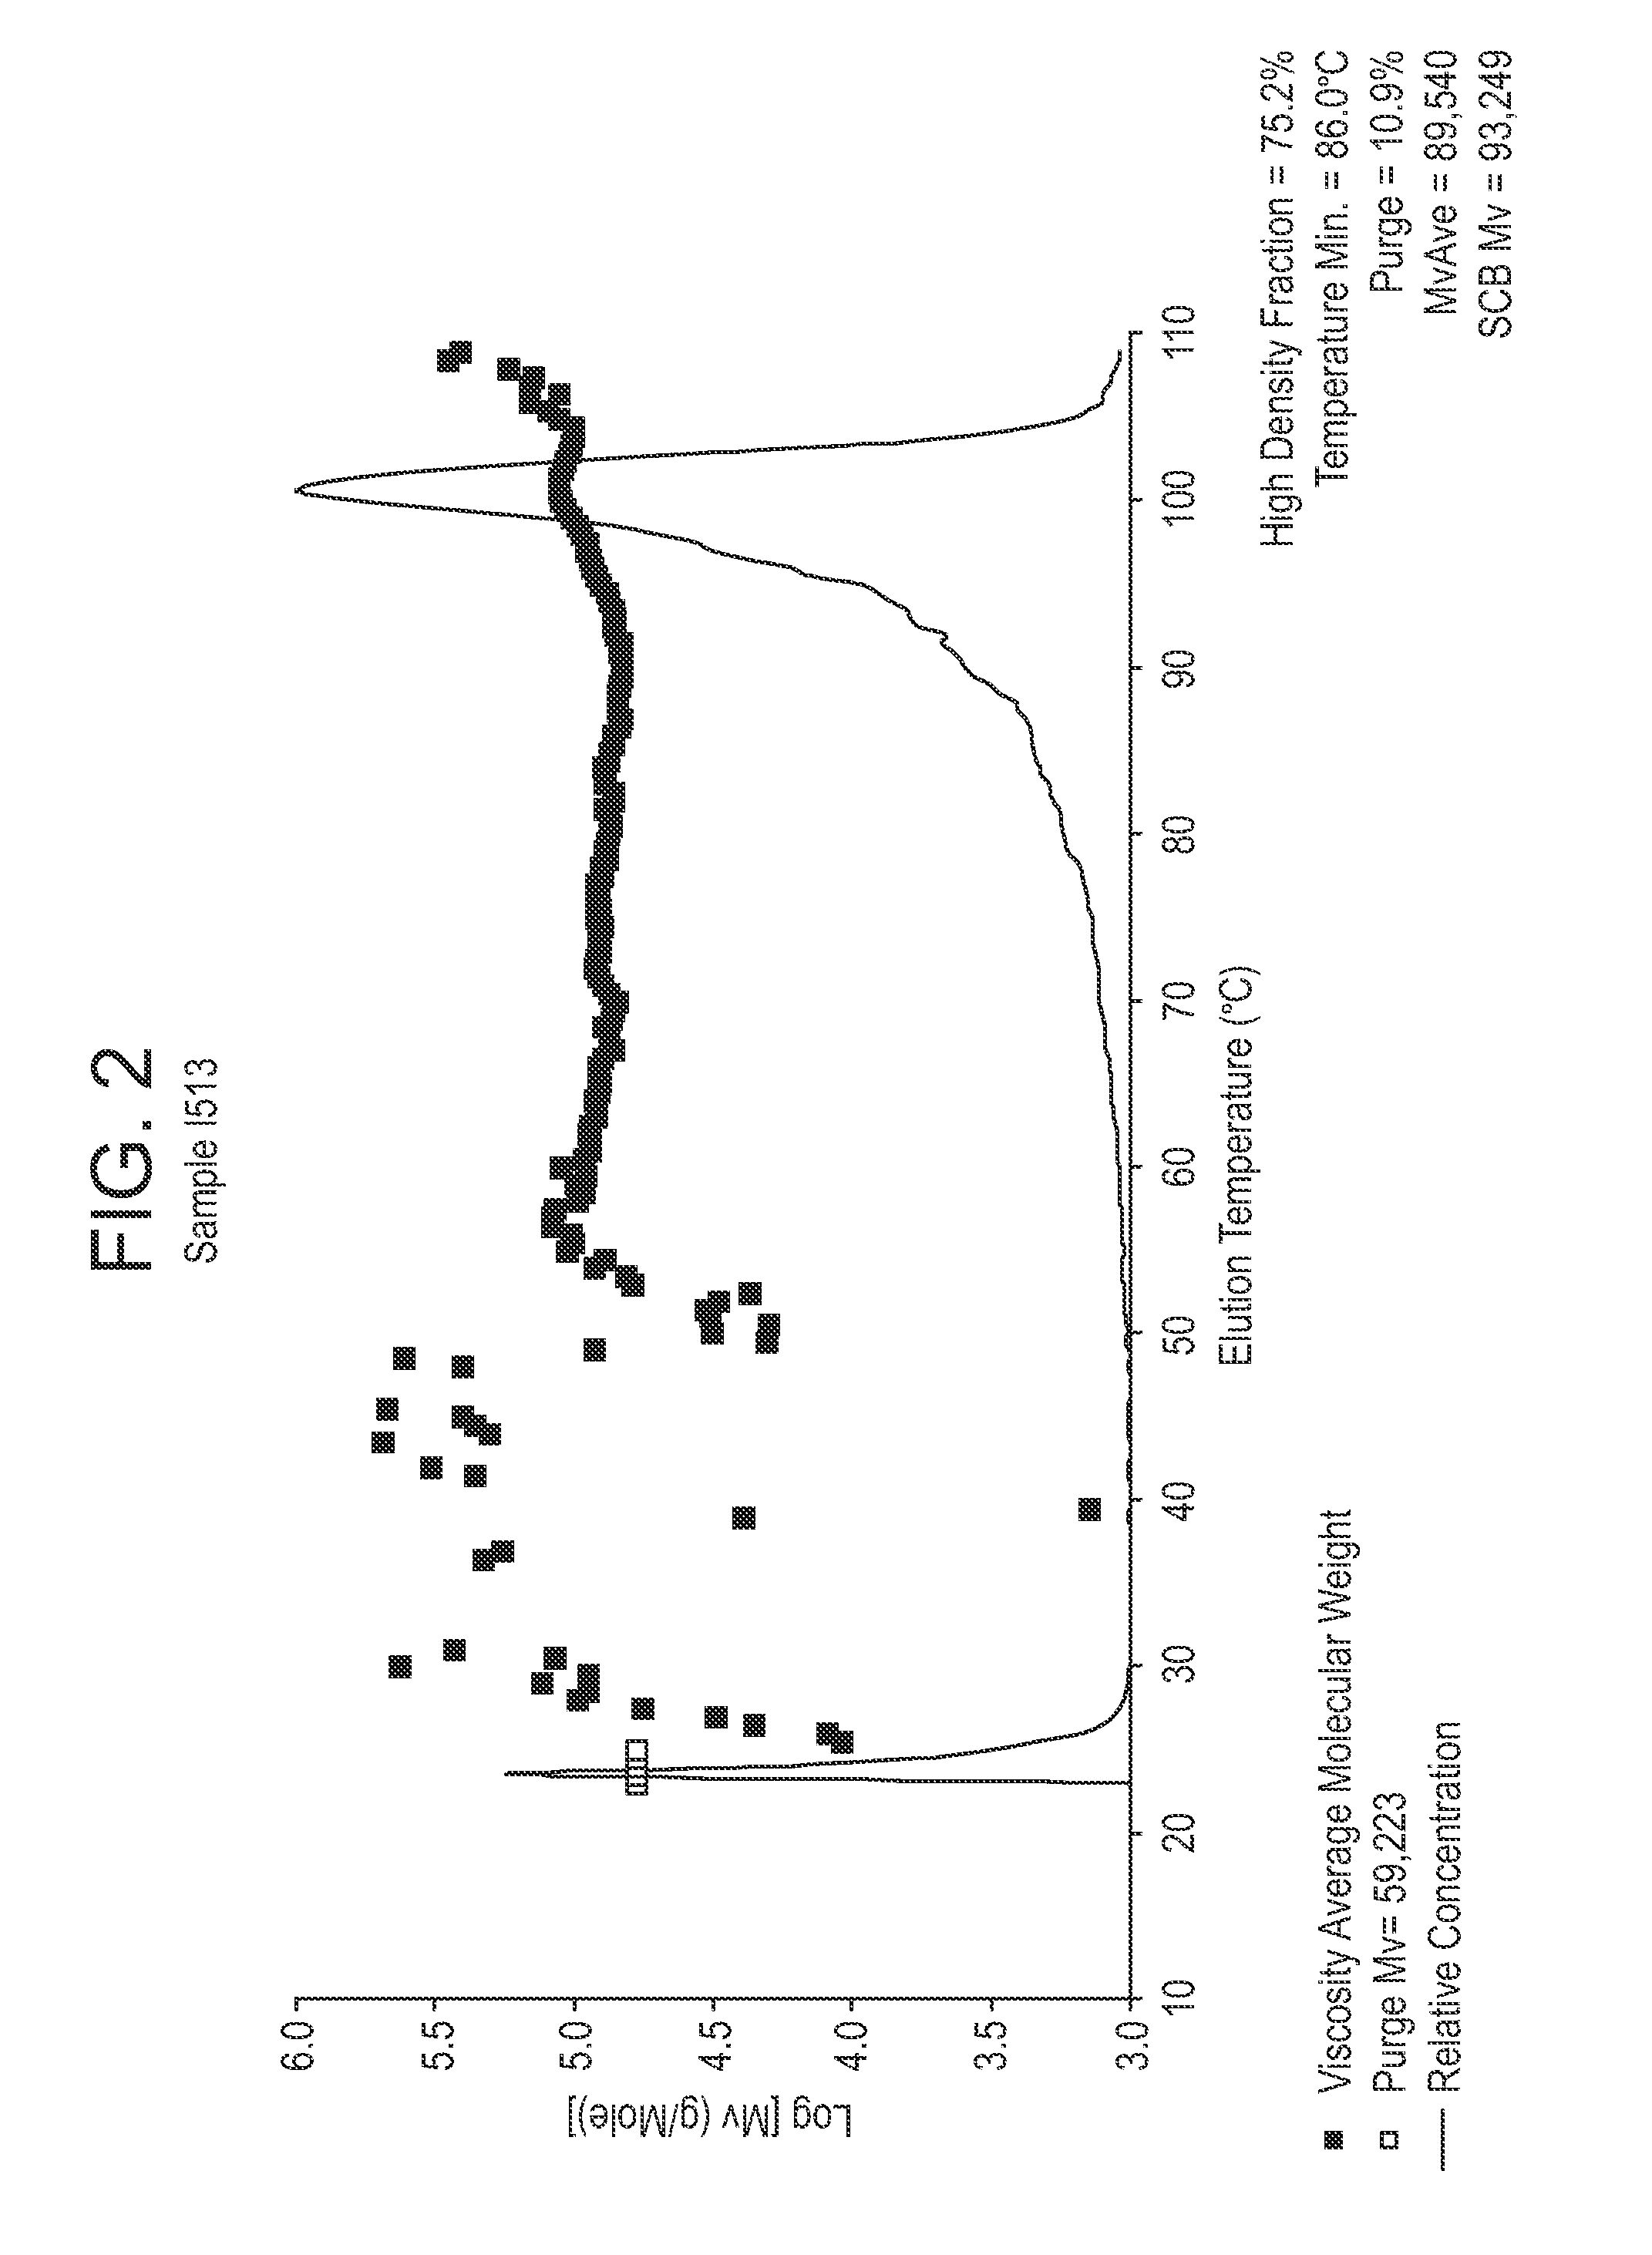 Polyethylene compositions, methods of making the same, and articles prepared therefrom